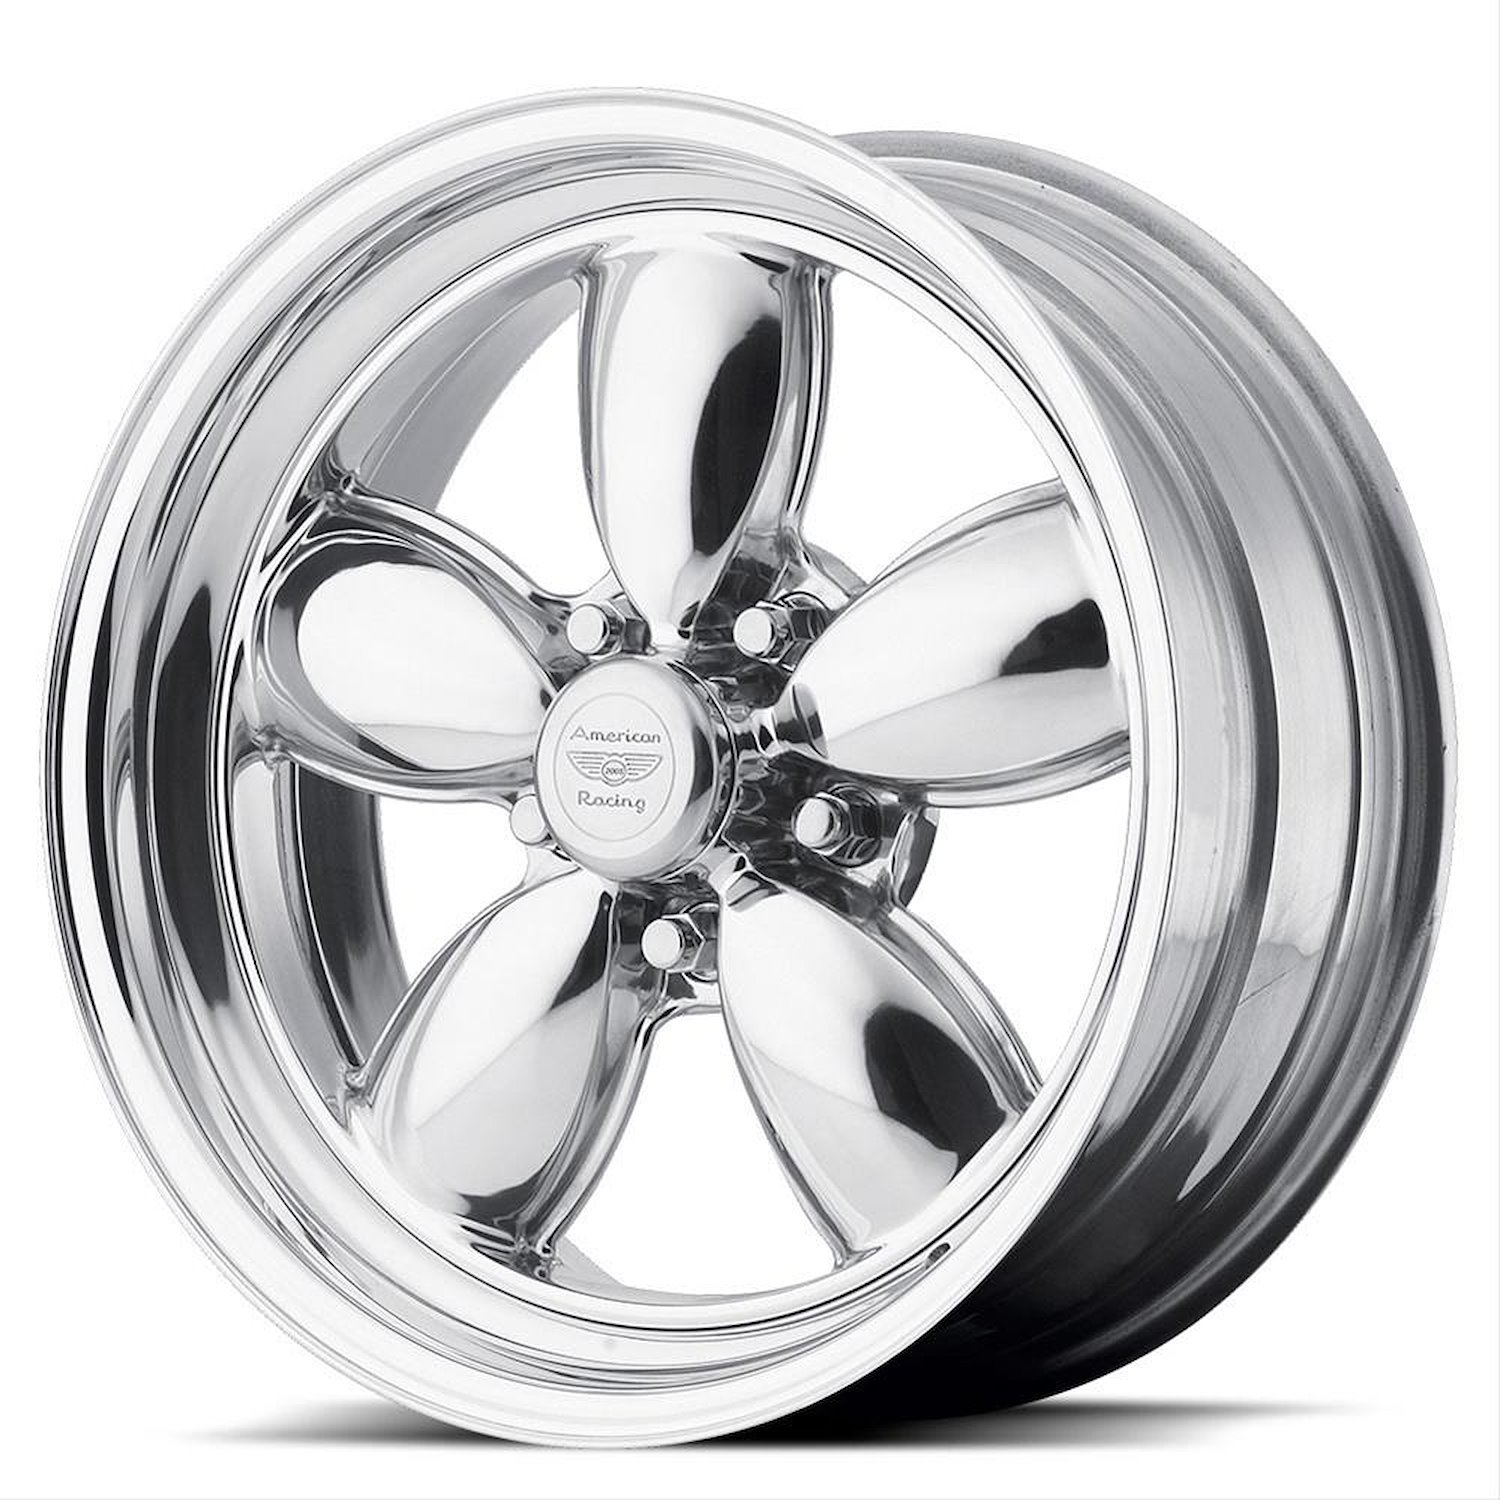 AMERICAN RACING CLASSIC 200S TWO-PIECE POLISHED 15 x 8 5x4.5 13 5.01